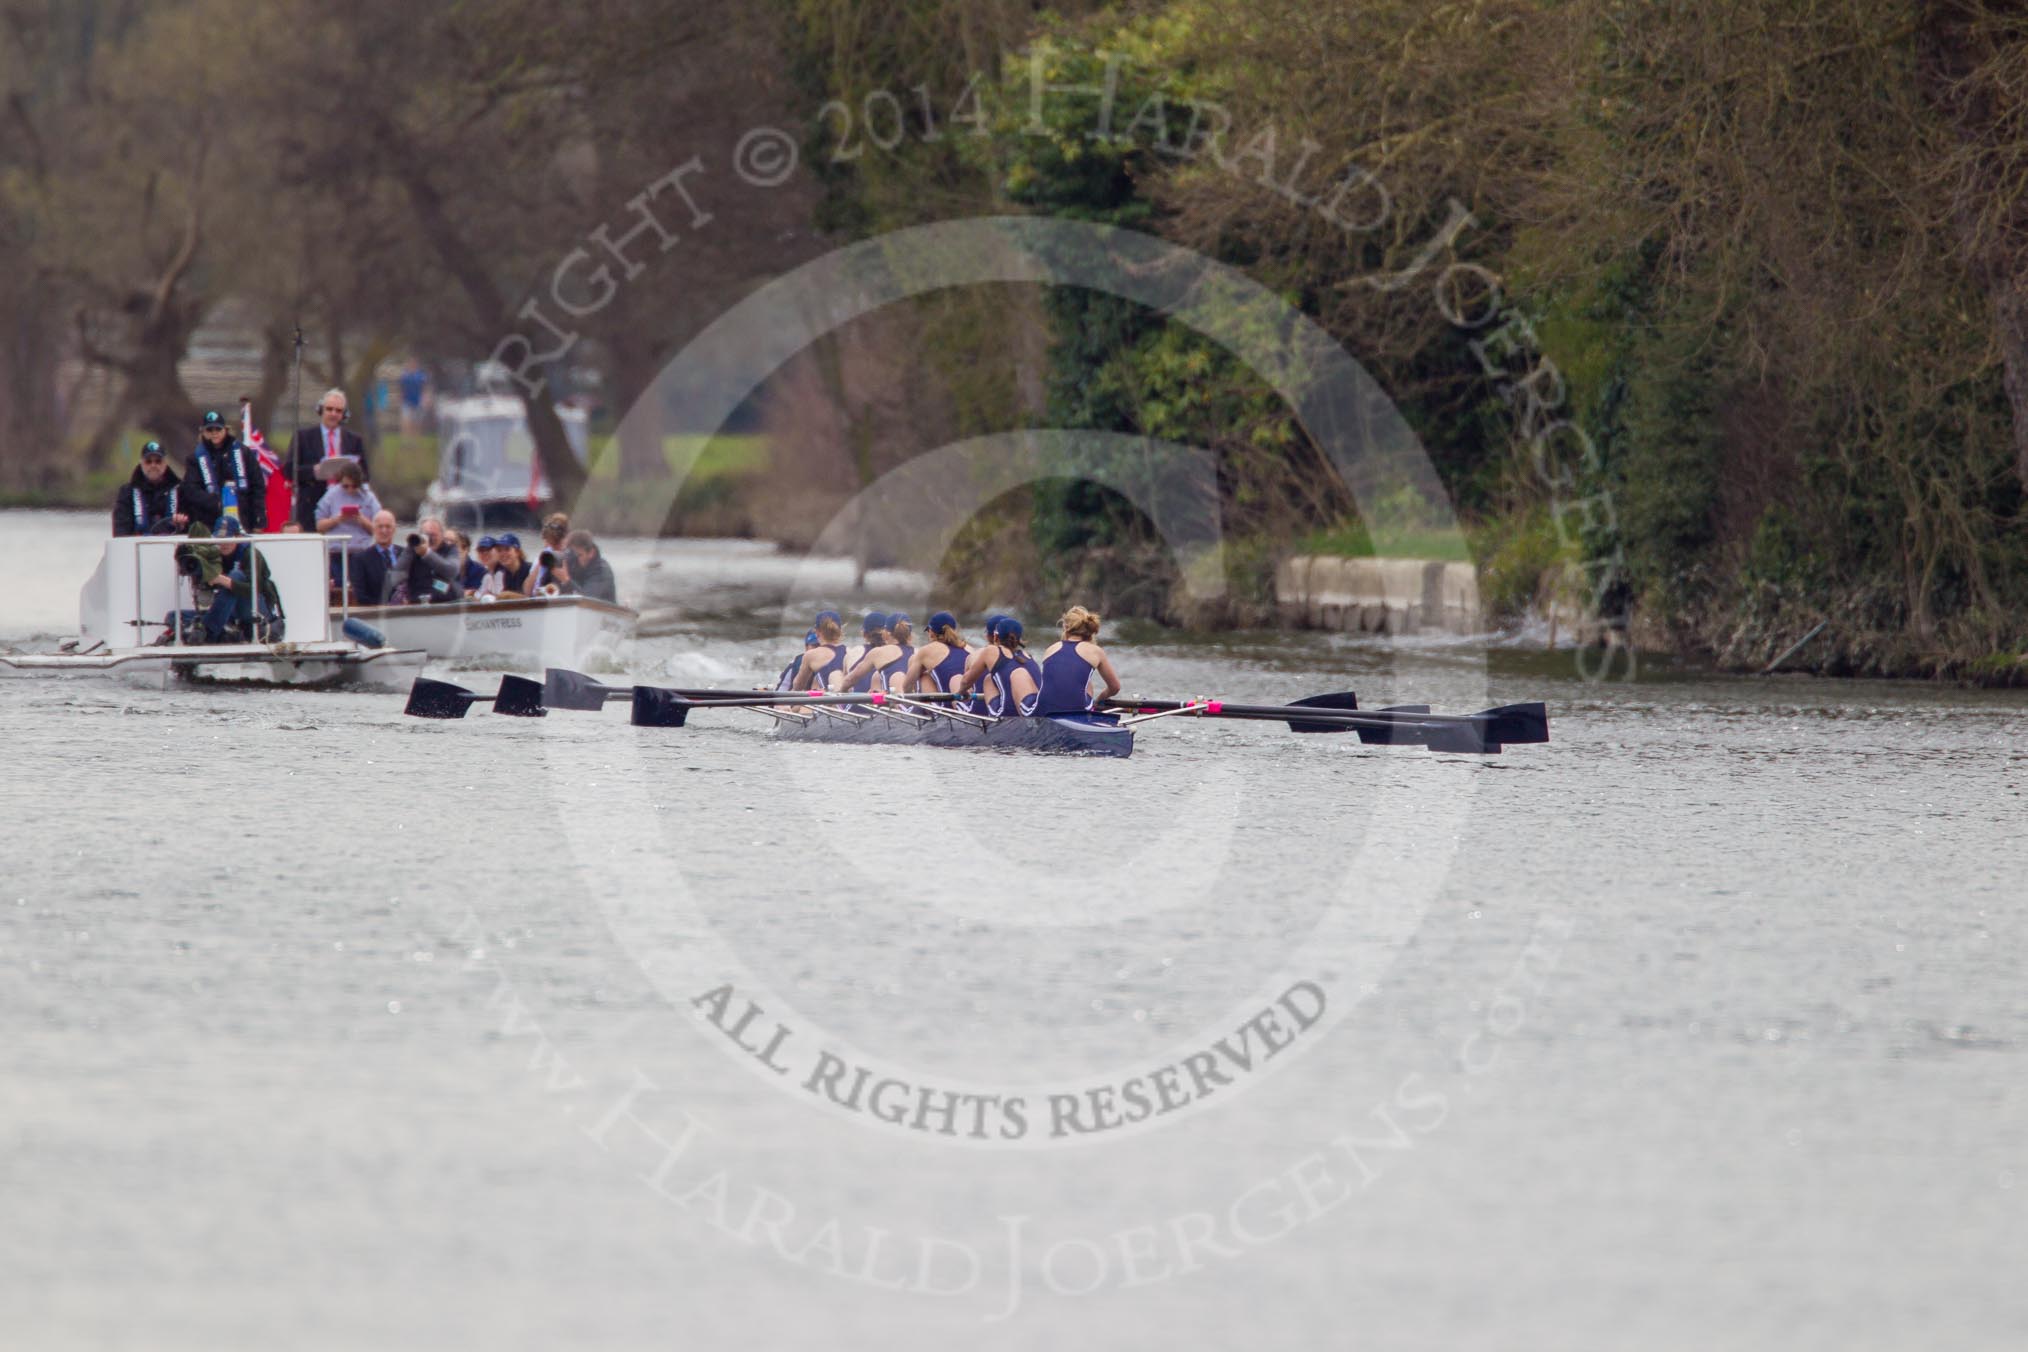 The Women's Boat Race and Henley Boat Races 2014: The Lightweight Women's Boat Race - OUWLRC in the lead, followed by the umpire's launch and the press..
River Thames,
Henley-on-Thames,
Buckinghamshire,
United Kingdom,
on 30 March 2014 at 14:48, image #218